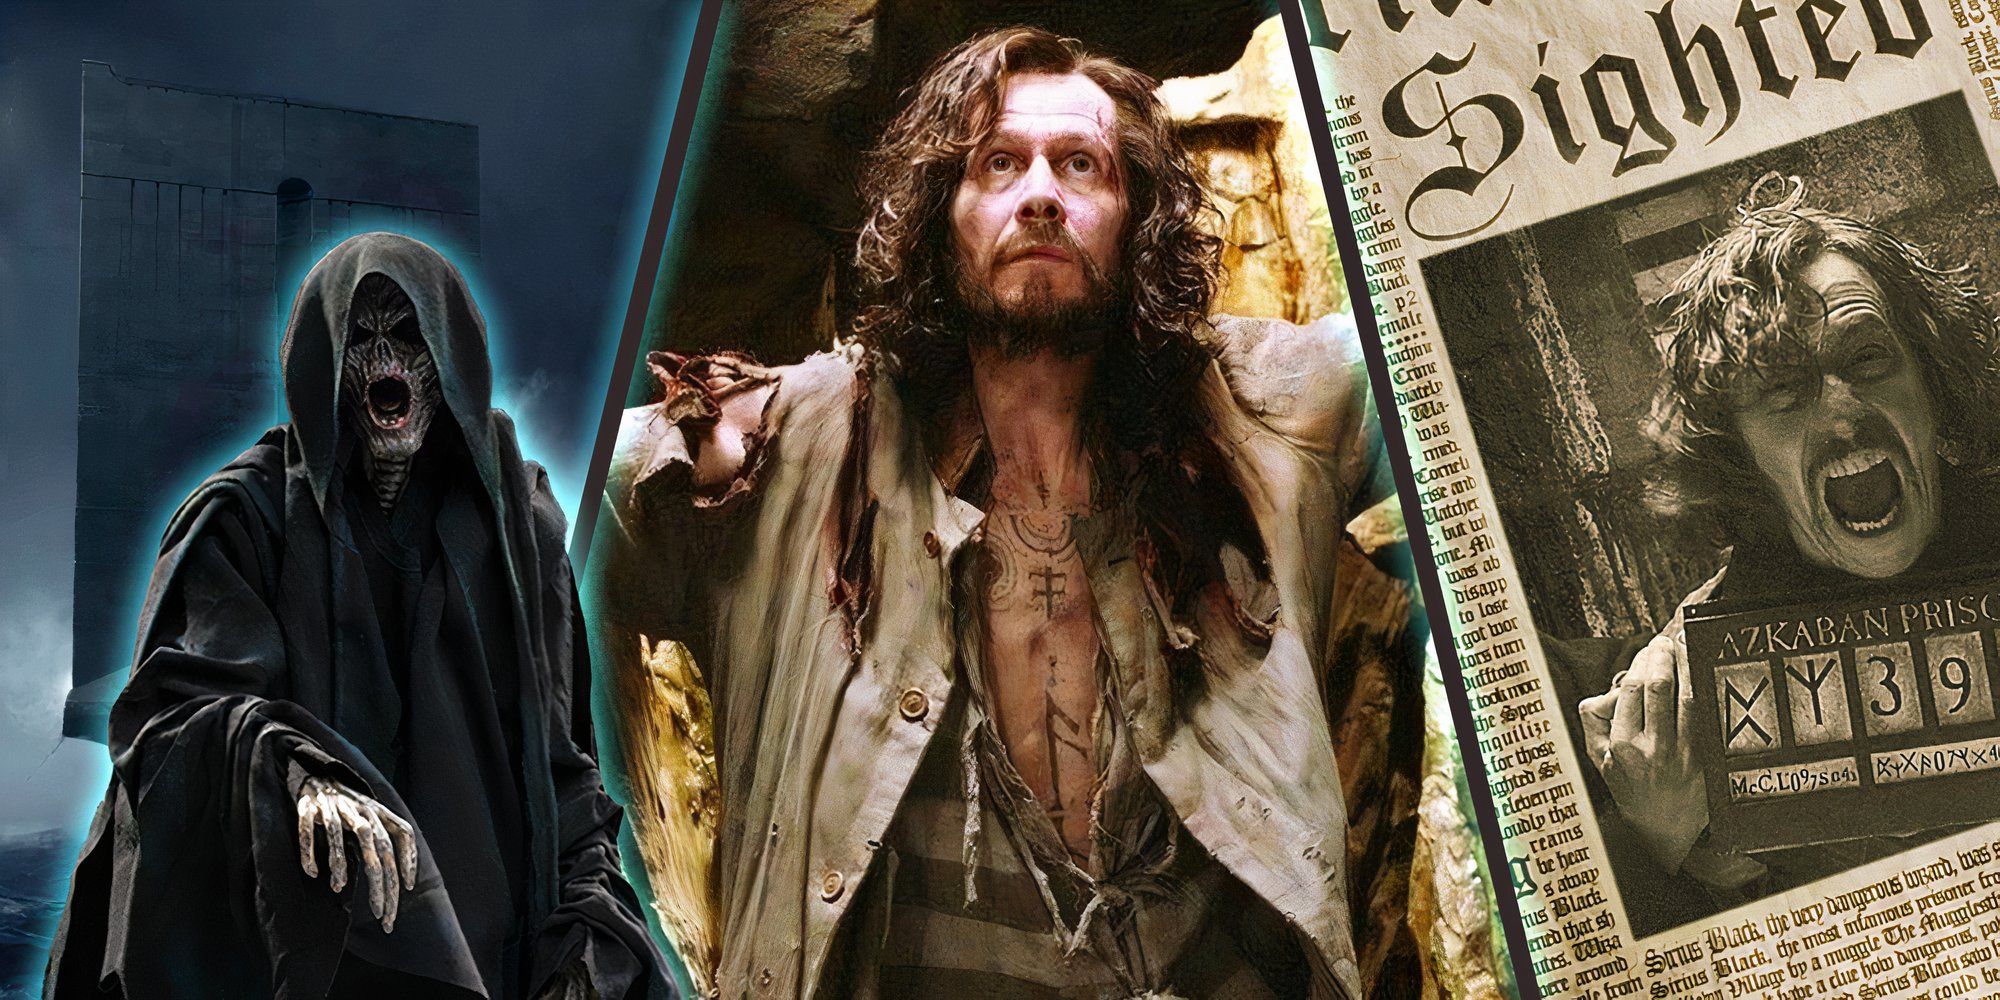 Three-way split image with Azkaban prison, Sirius Black and The Daily Prophet with a Dementor 